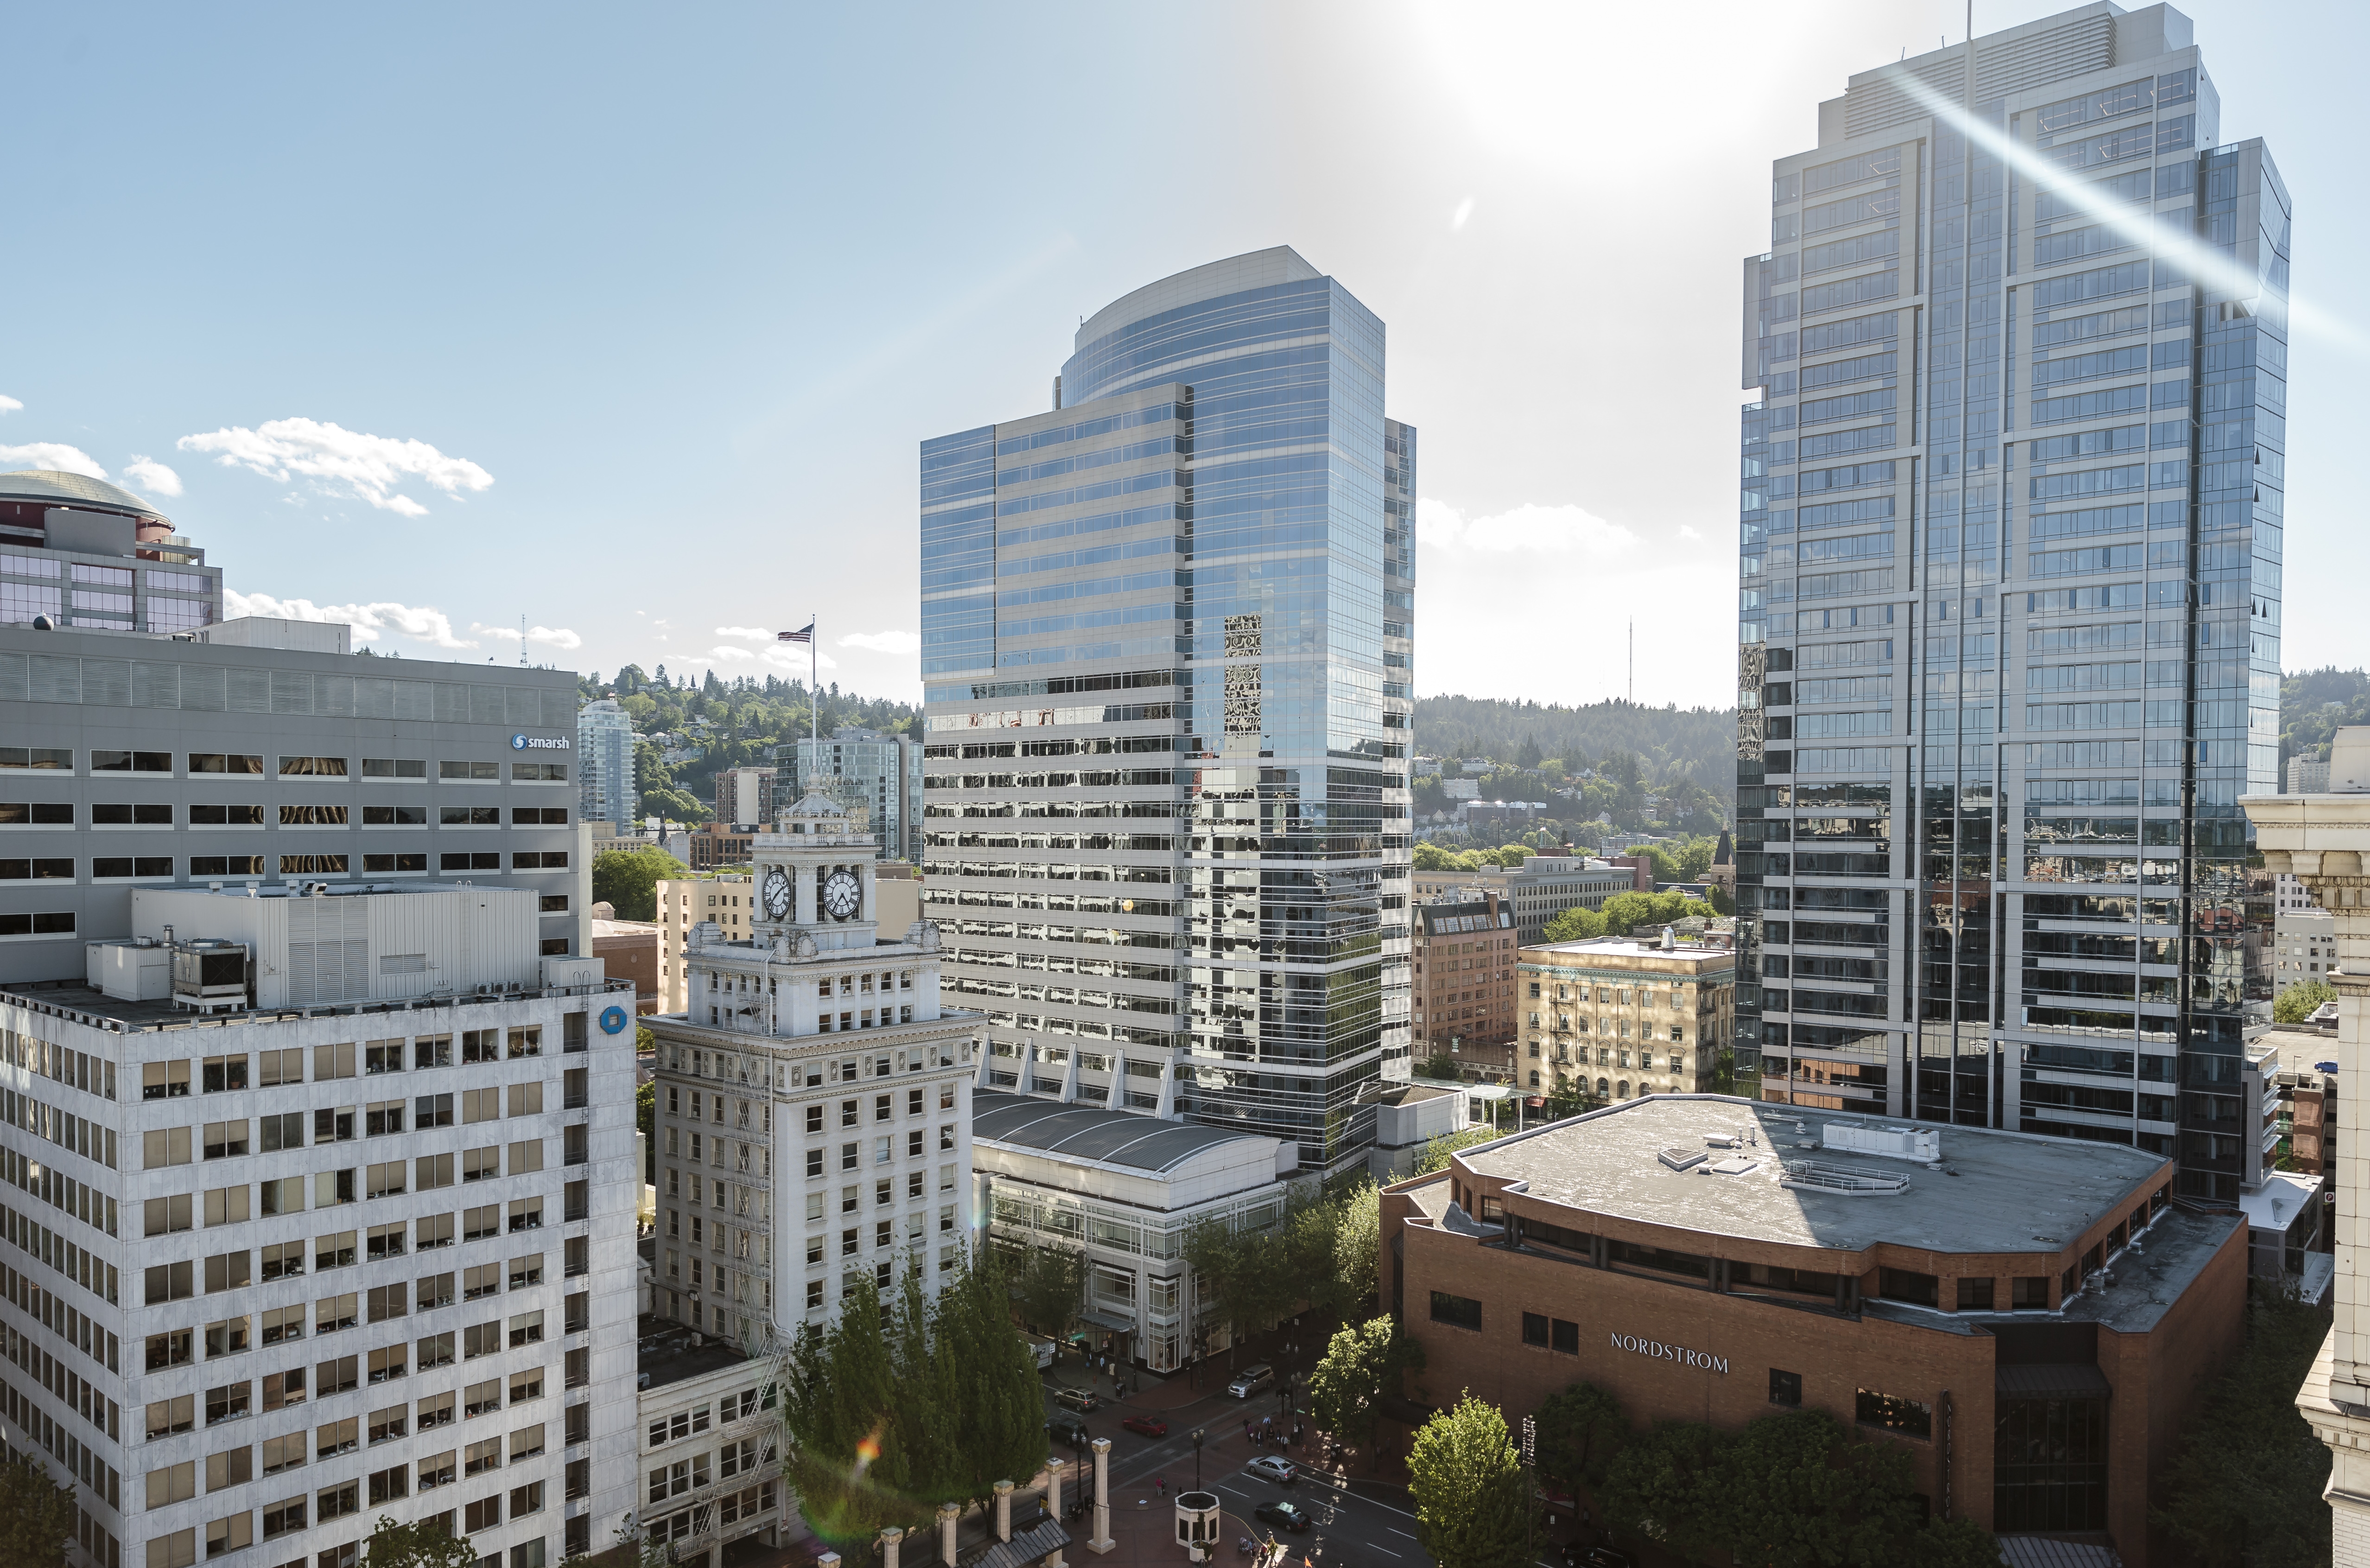 High-rise buildings in downtown Portland